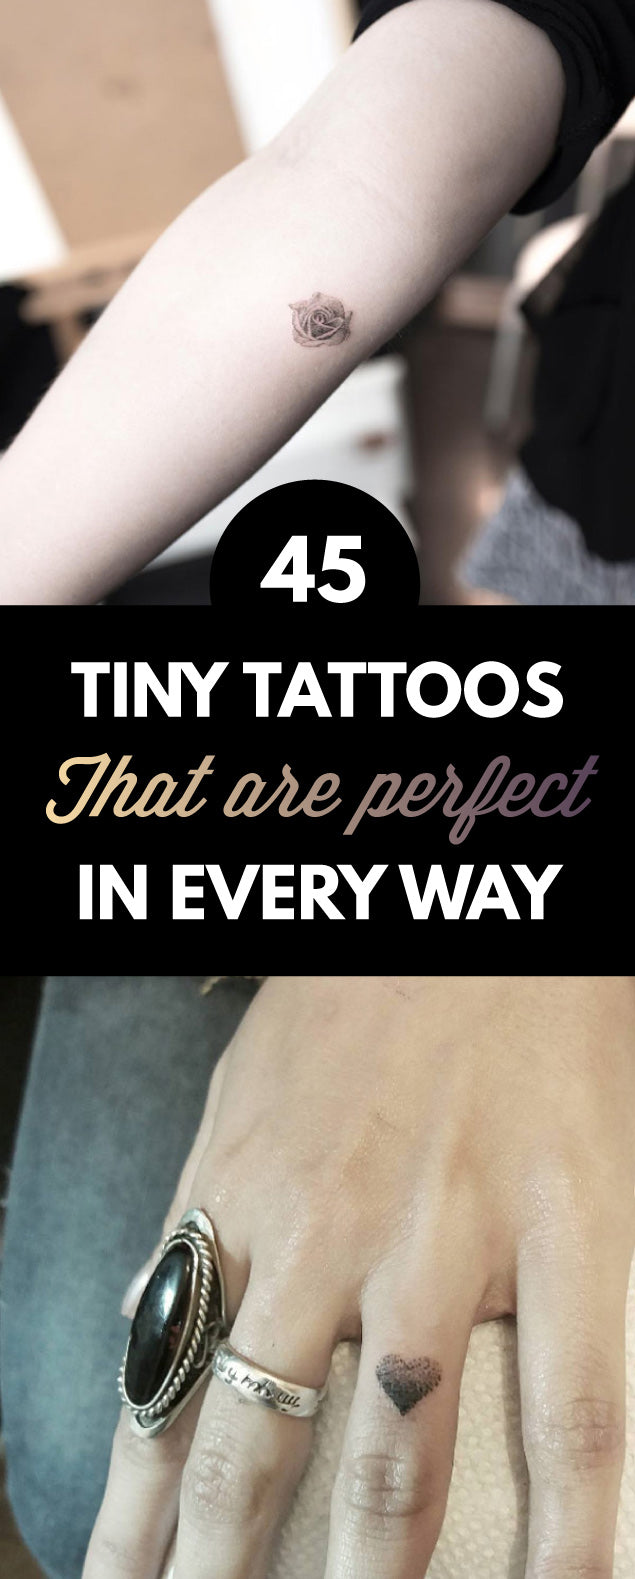 45 Tiny Tattoos That Are Perfect in Every Way – Tattoo for a week